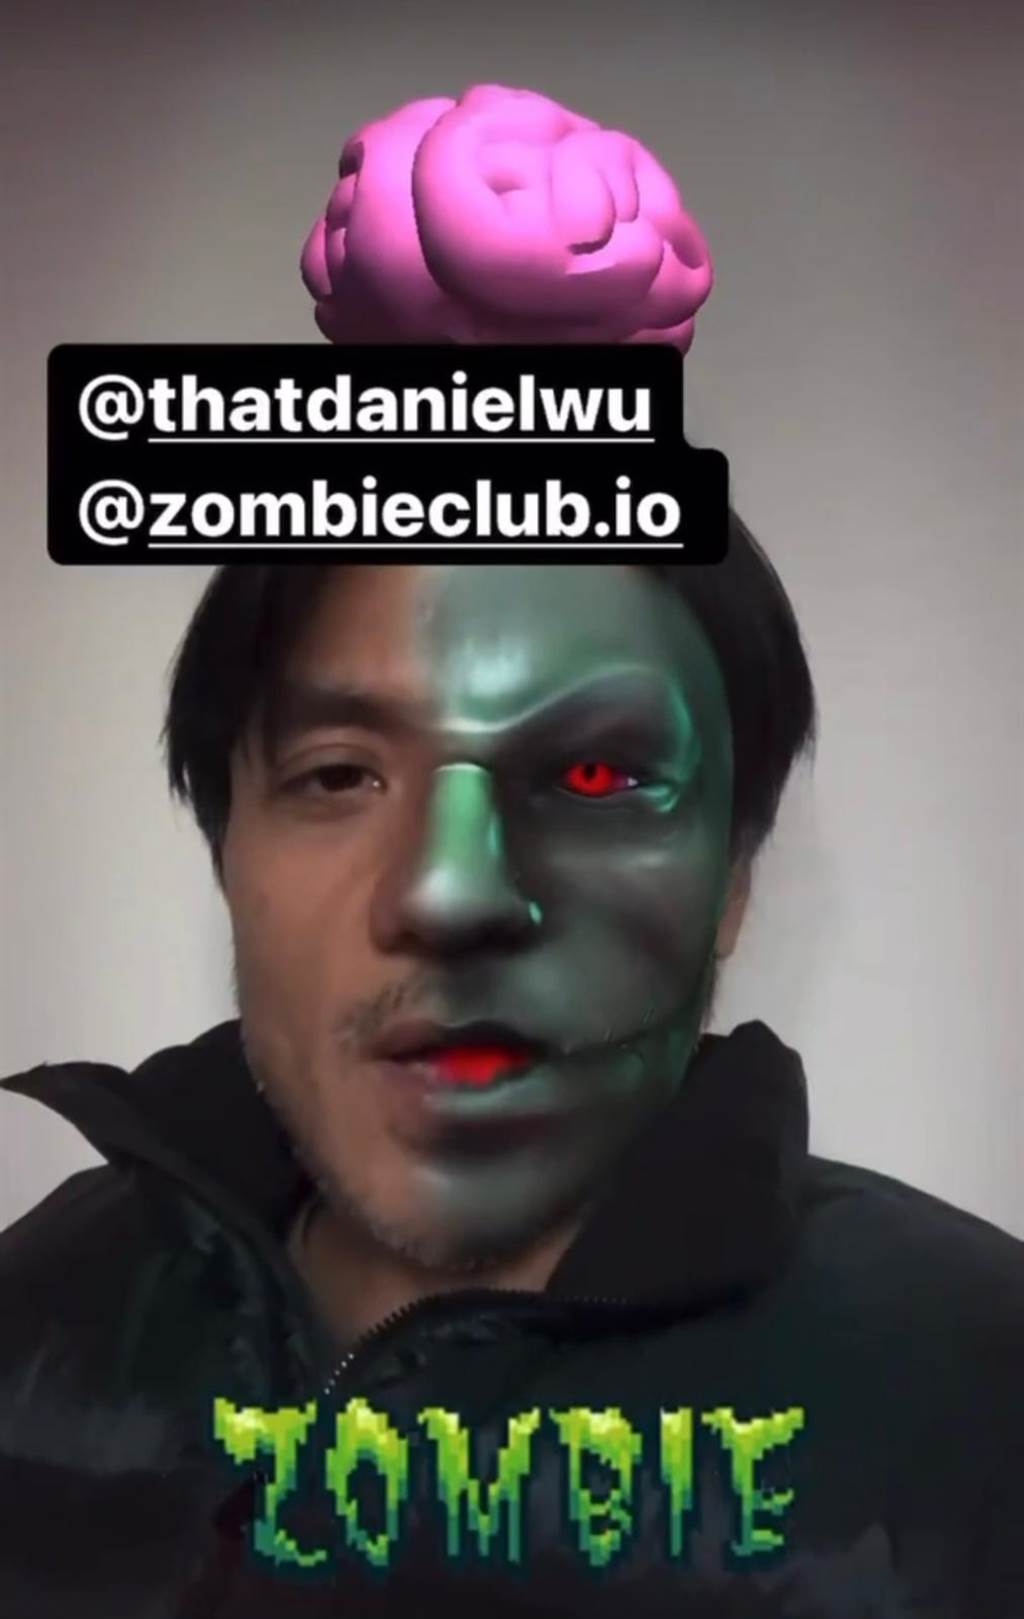 Stephen Fung playing with ZombieClub’s Instagram filter